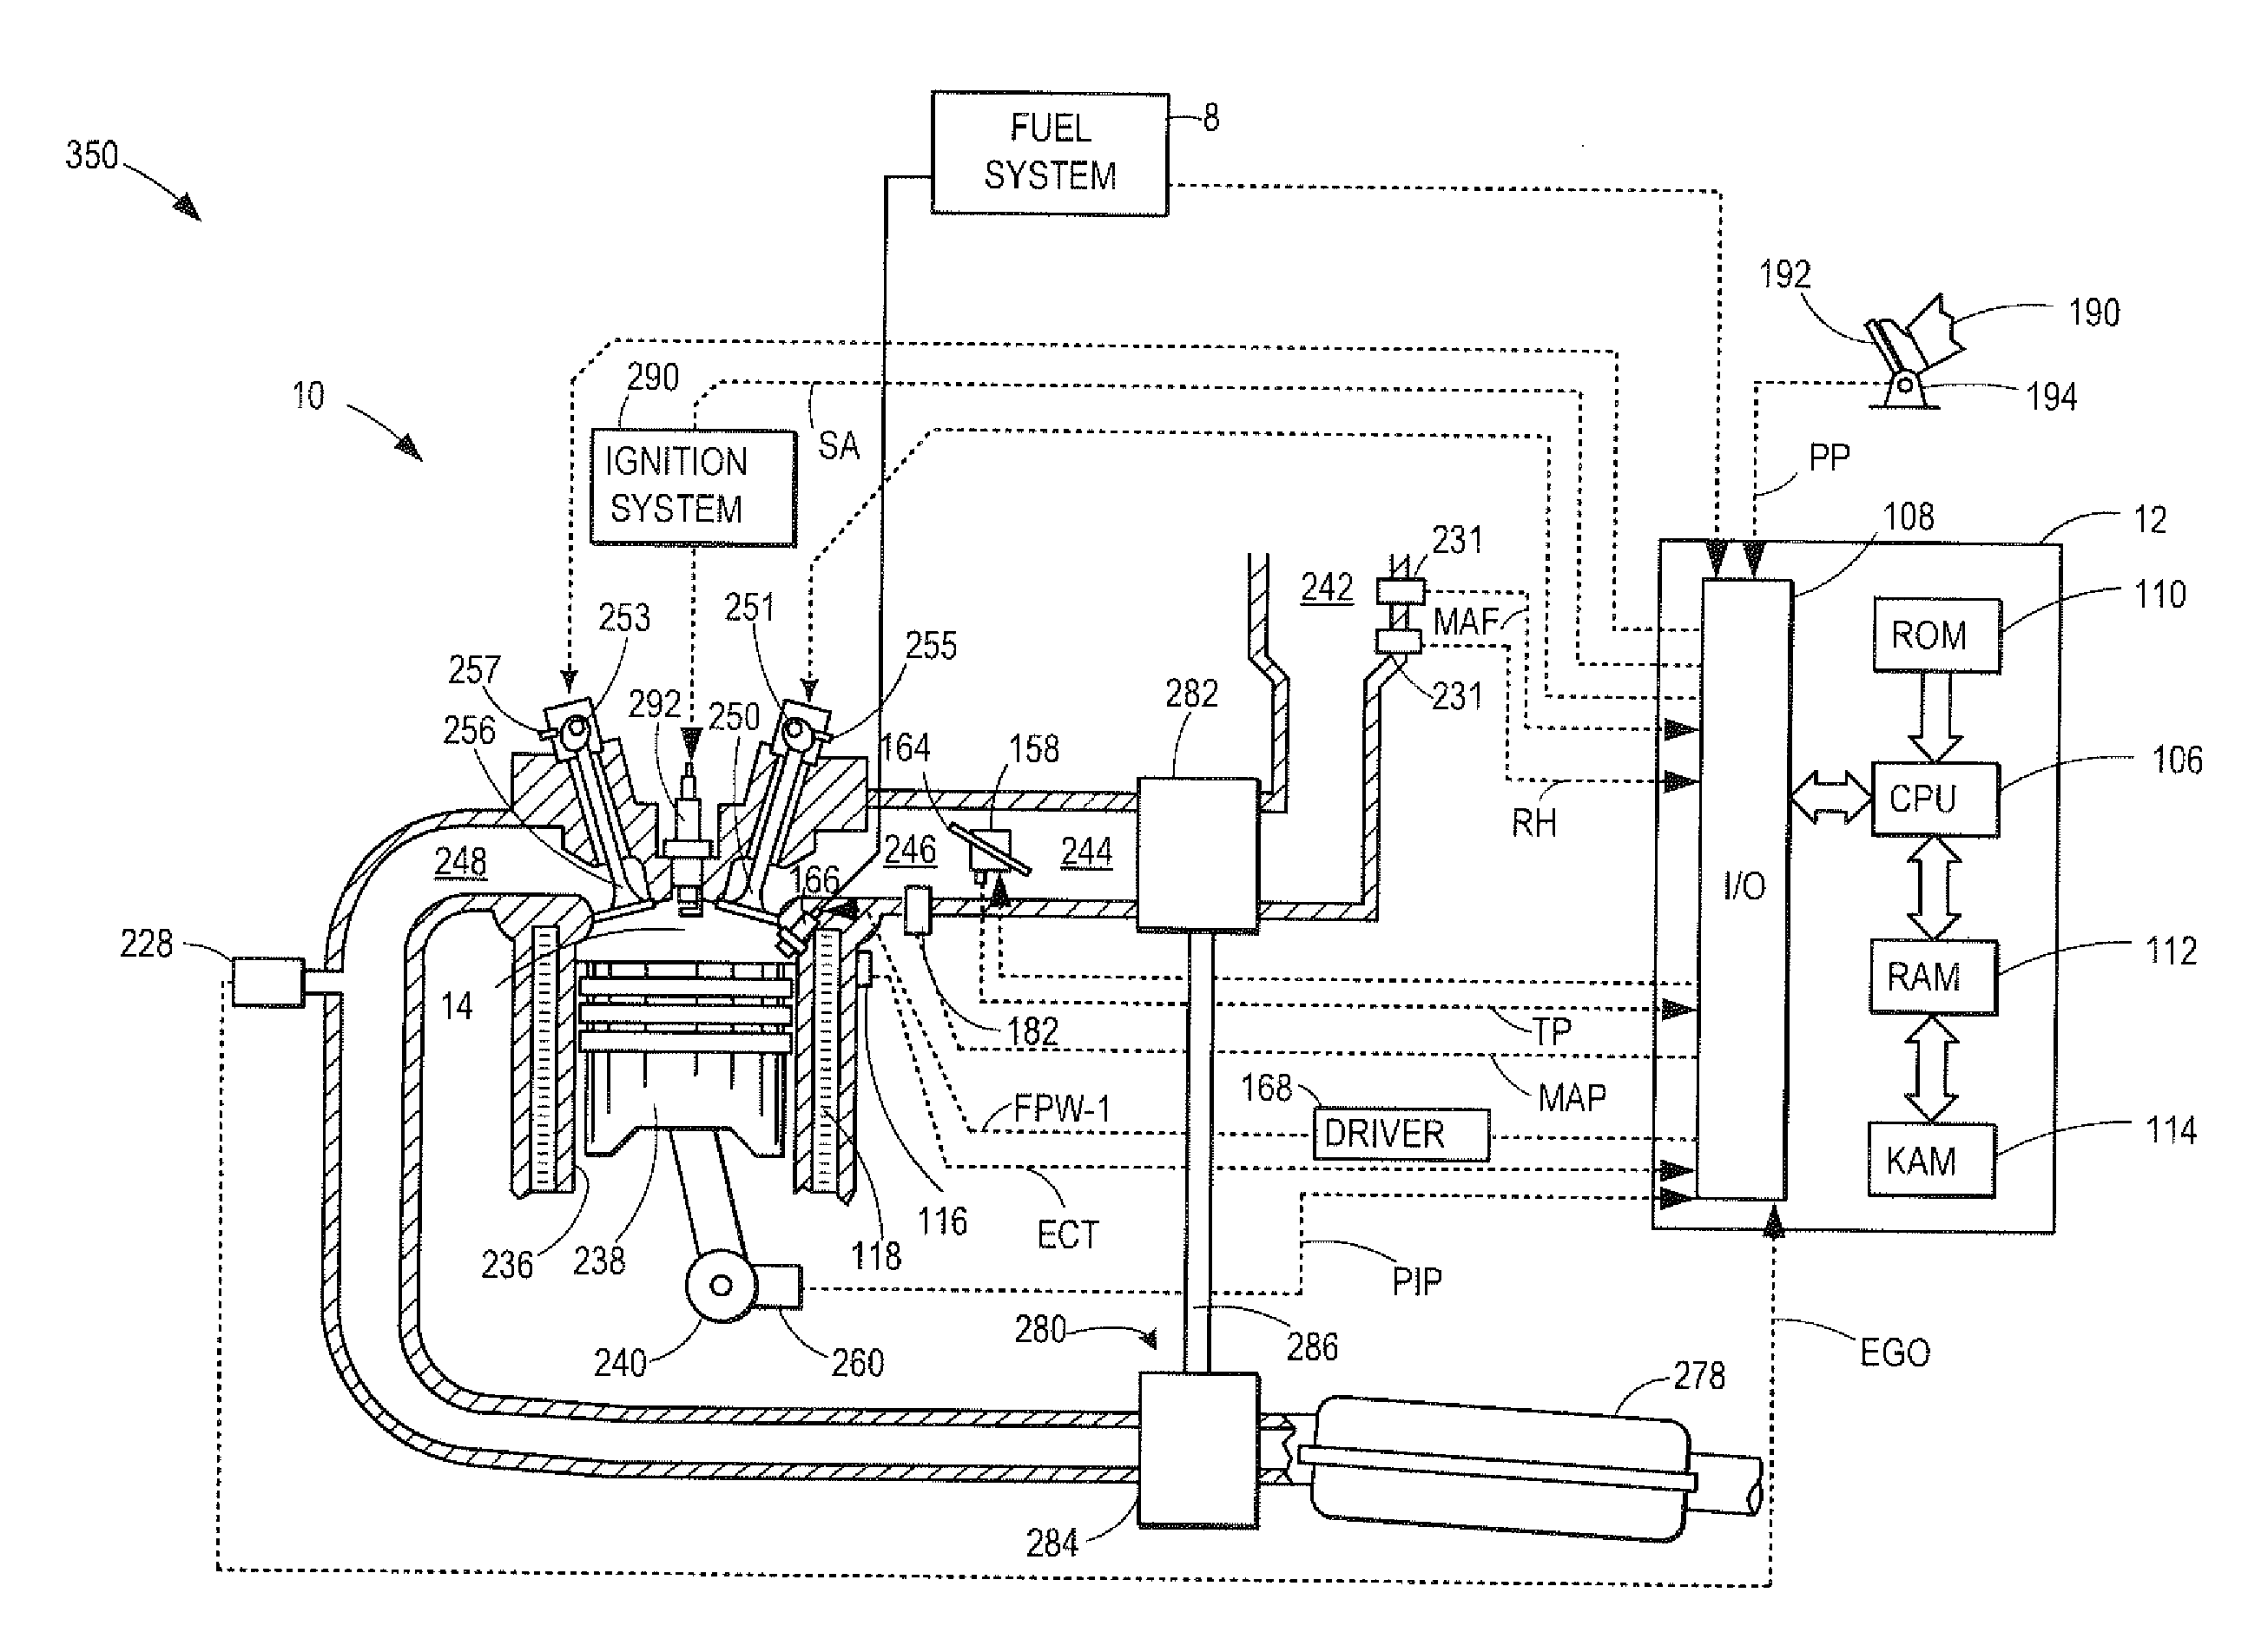 Methods and Systems for Variable Displacement Engine Control